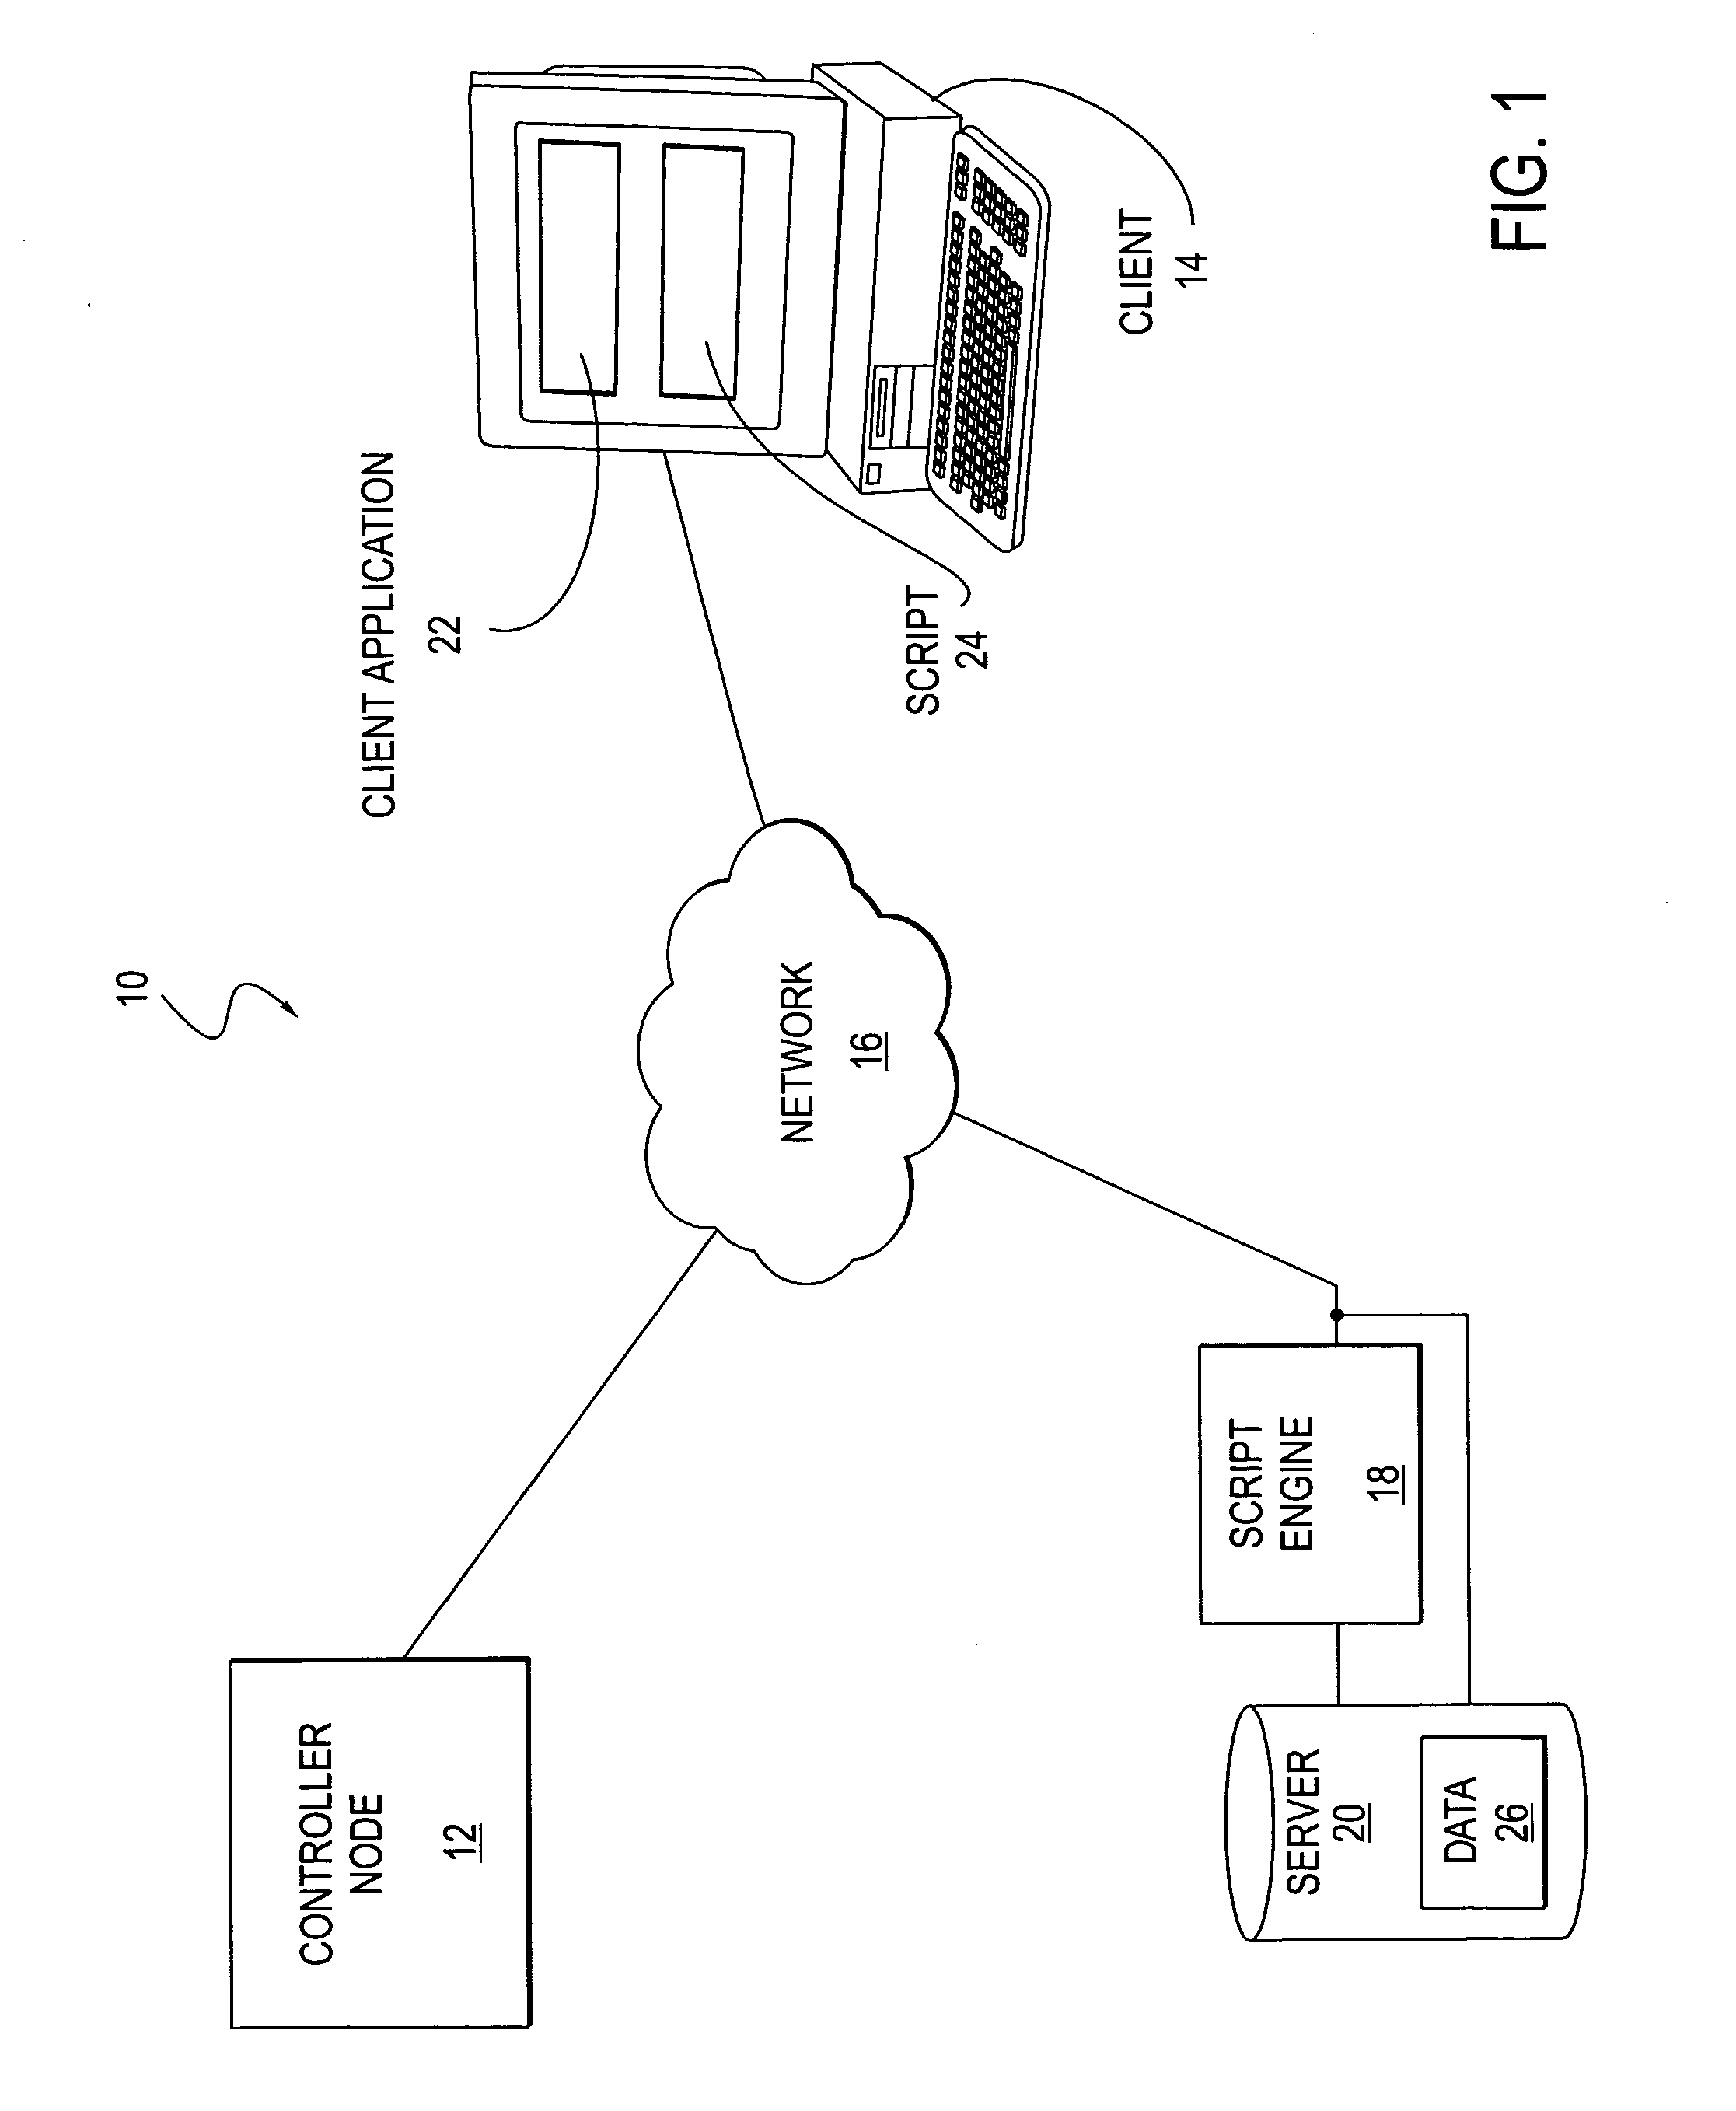 Method and system for intelligent and adaptive exception handling